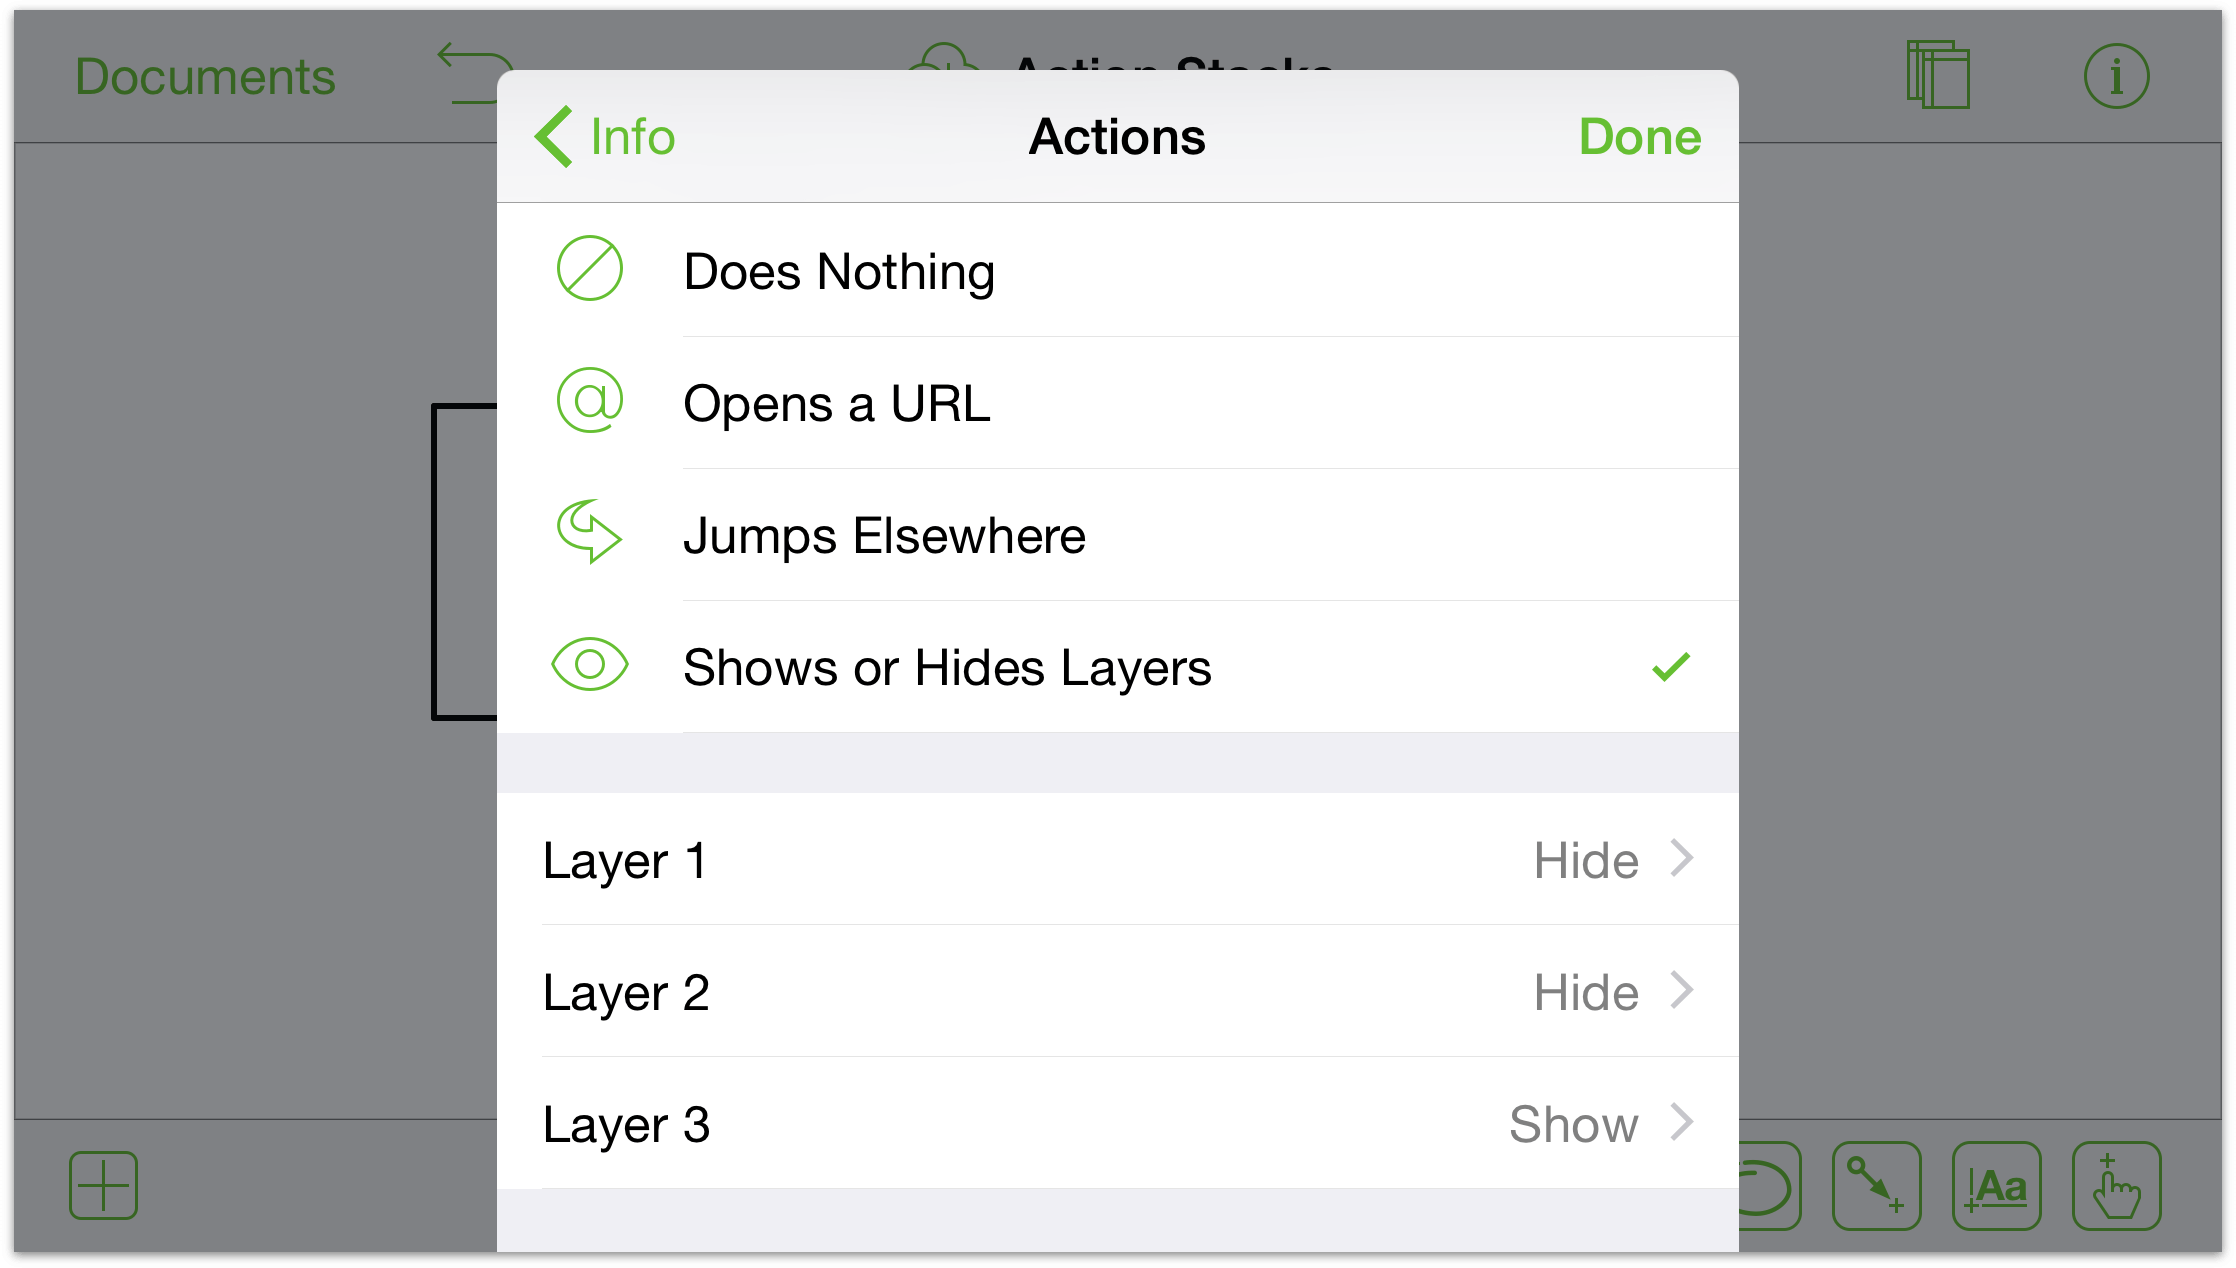 The actions for Layer 2